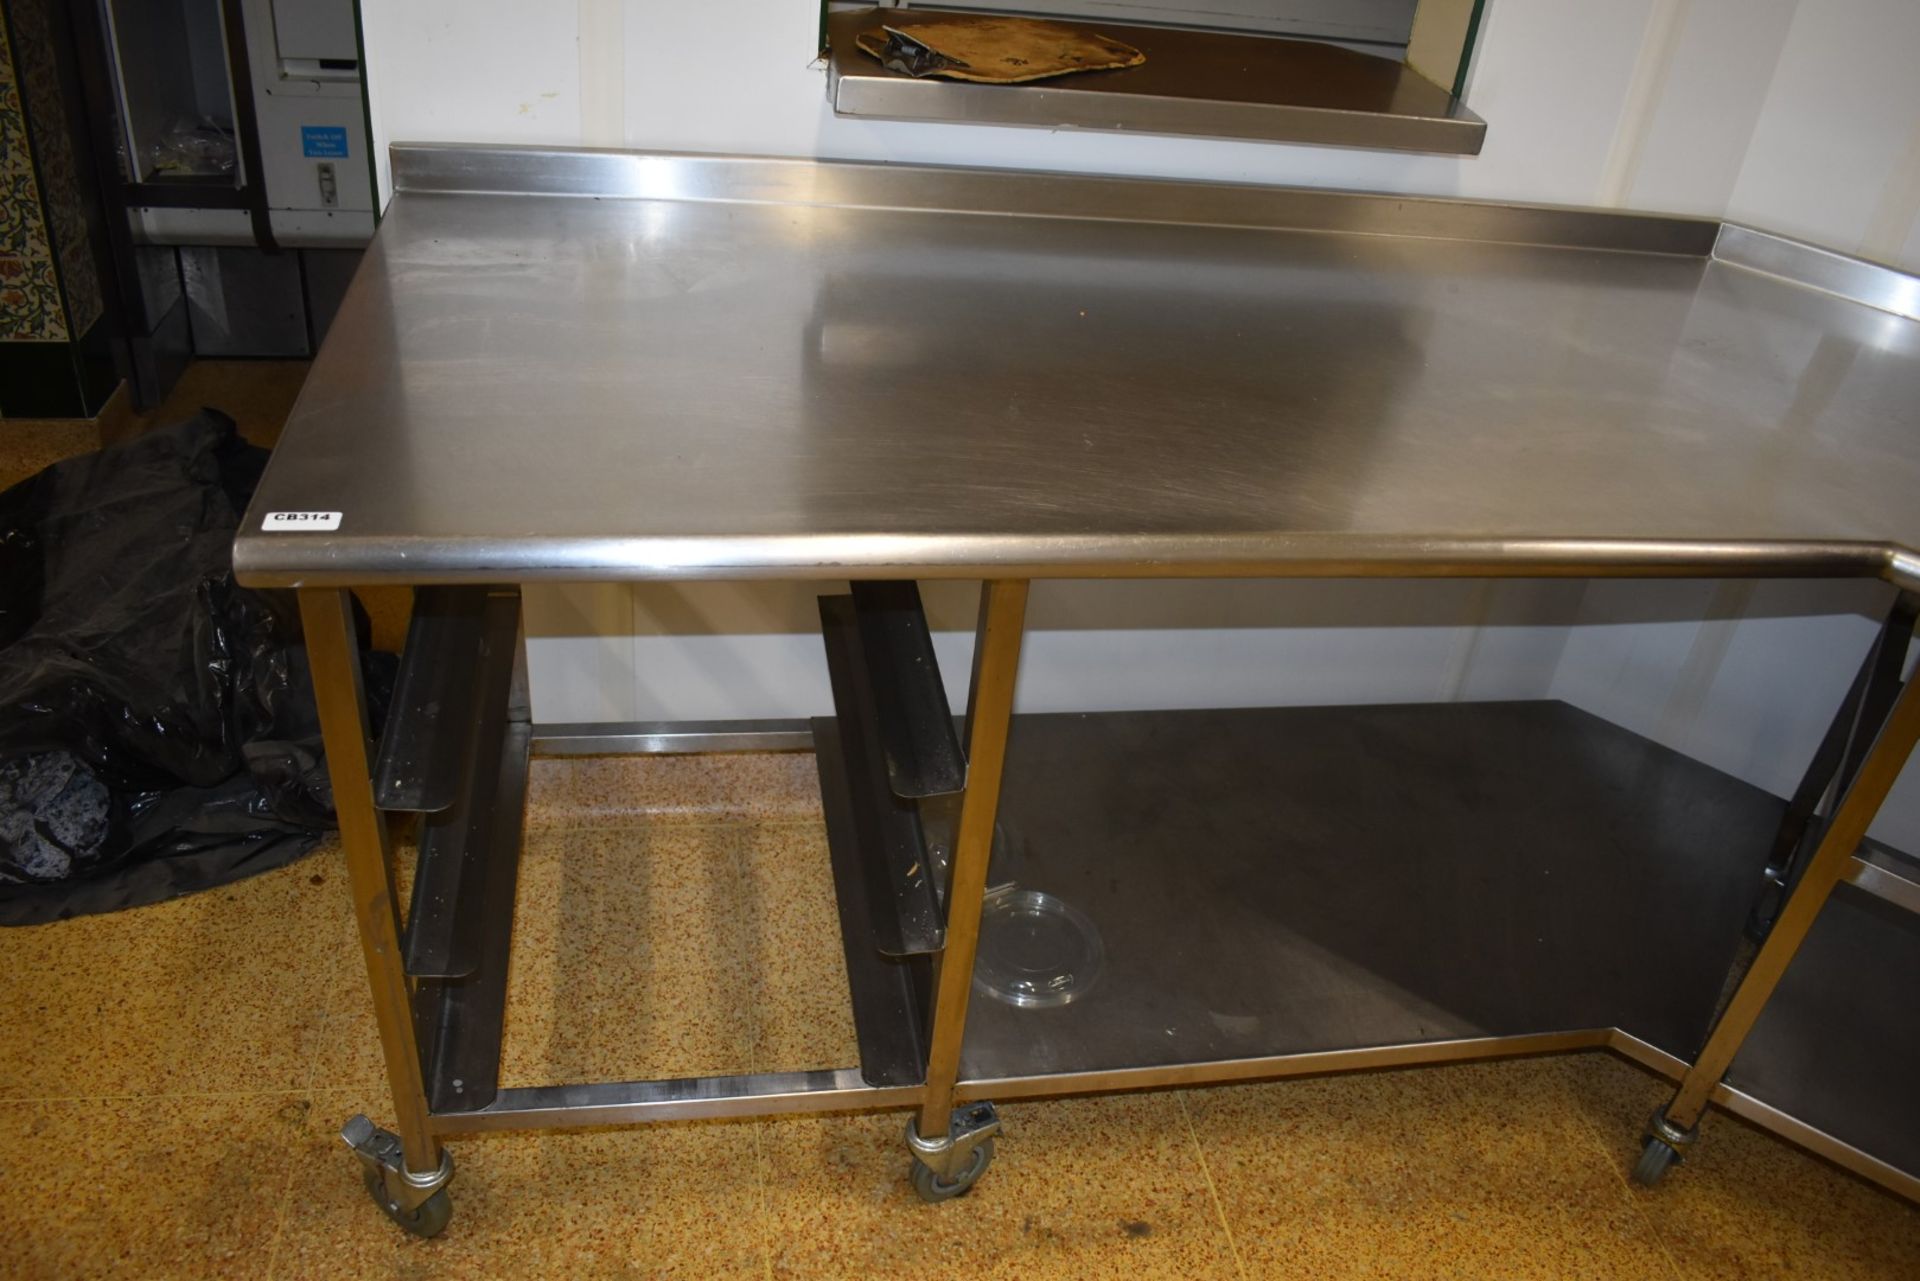 1 x Large Stainless Steel Corner Shaped Prep Table on Castors With Upstand, Undershelf, Tray Rails - Image 3 of 6